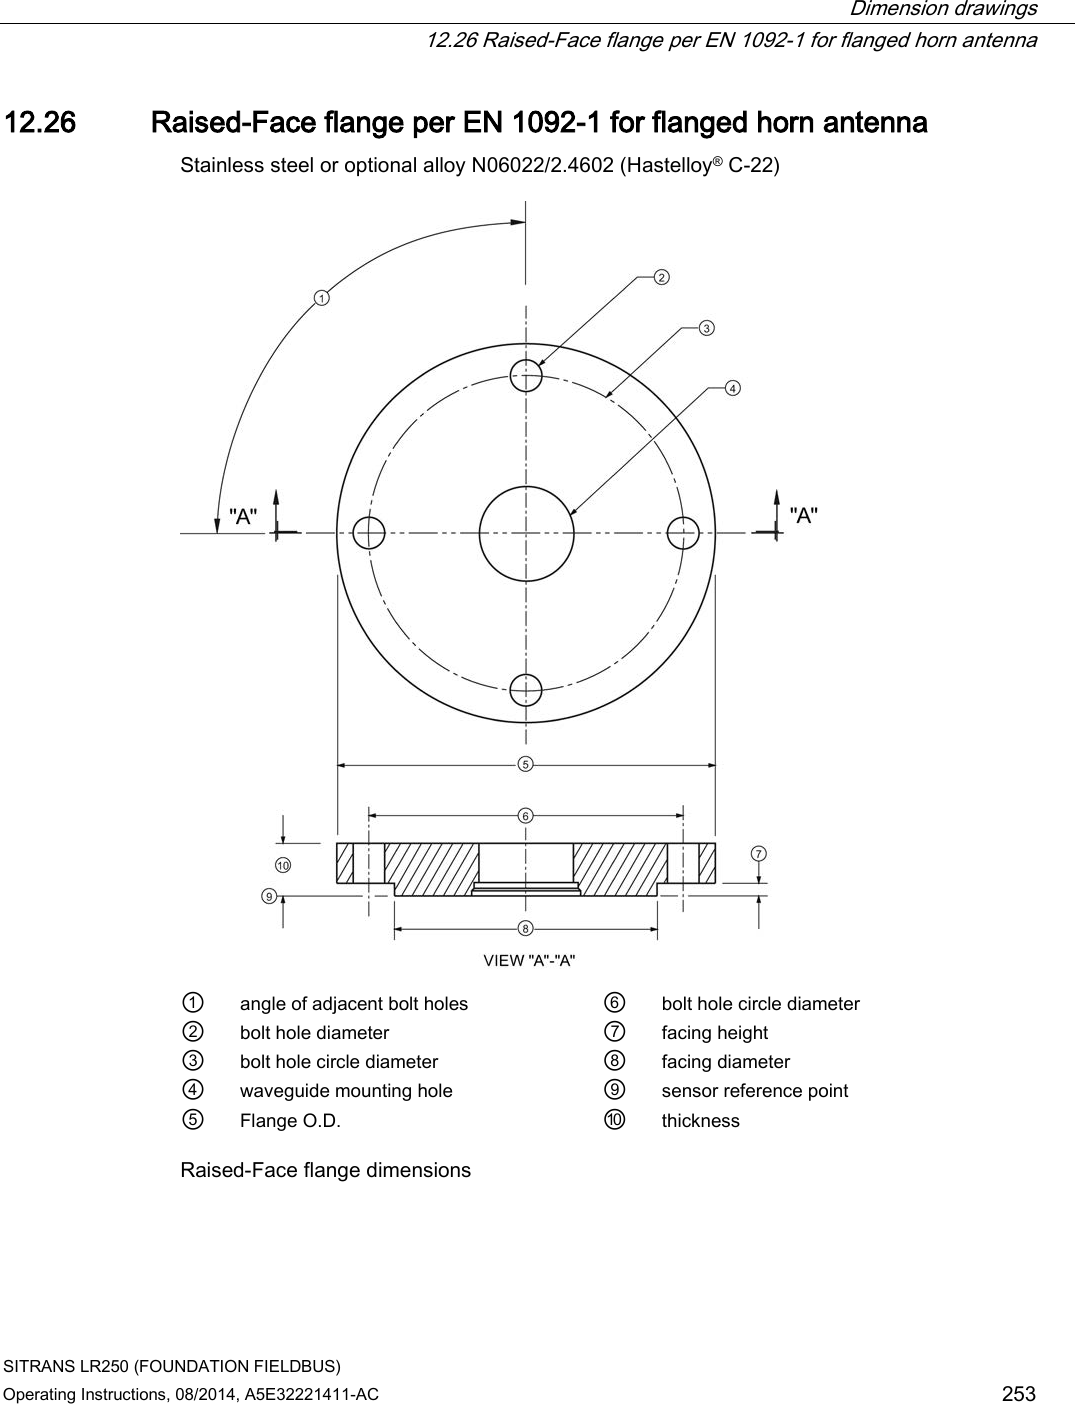  Dimension drawings  12.26 Raised-Face flange per EN 1092-1 for flanged horn antenna SITRANS LR250 (FOUNDATION FIELDBUS) Operating Instructions, 08/2014, A5E32221411-AC 253 12.26 Raised-Face flange per EN 1092-1 for flanged horn antenna Stainless steel or optional alloy N06022/2.4602 (Hastelloy® C-22)  ① angle of adjacent bolt holes ⑥ bolt hole circle diameter ② bolt hole diameter ⑦ facing height ③ bolt hole circle diameter ⑧ facing diameter ④ waveguide mounting hole ⑨ sensor reference point ⑤ Flange O.D. ⑩ thickness Raised-Face flange dimensions 